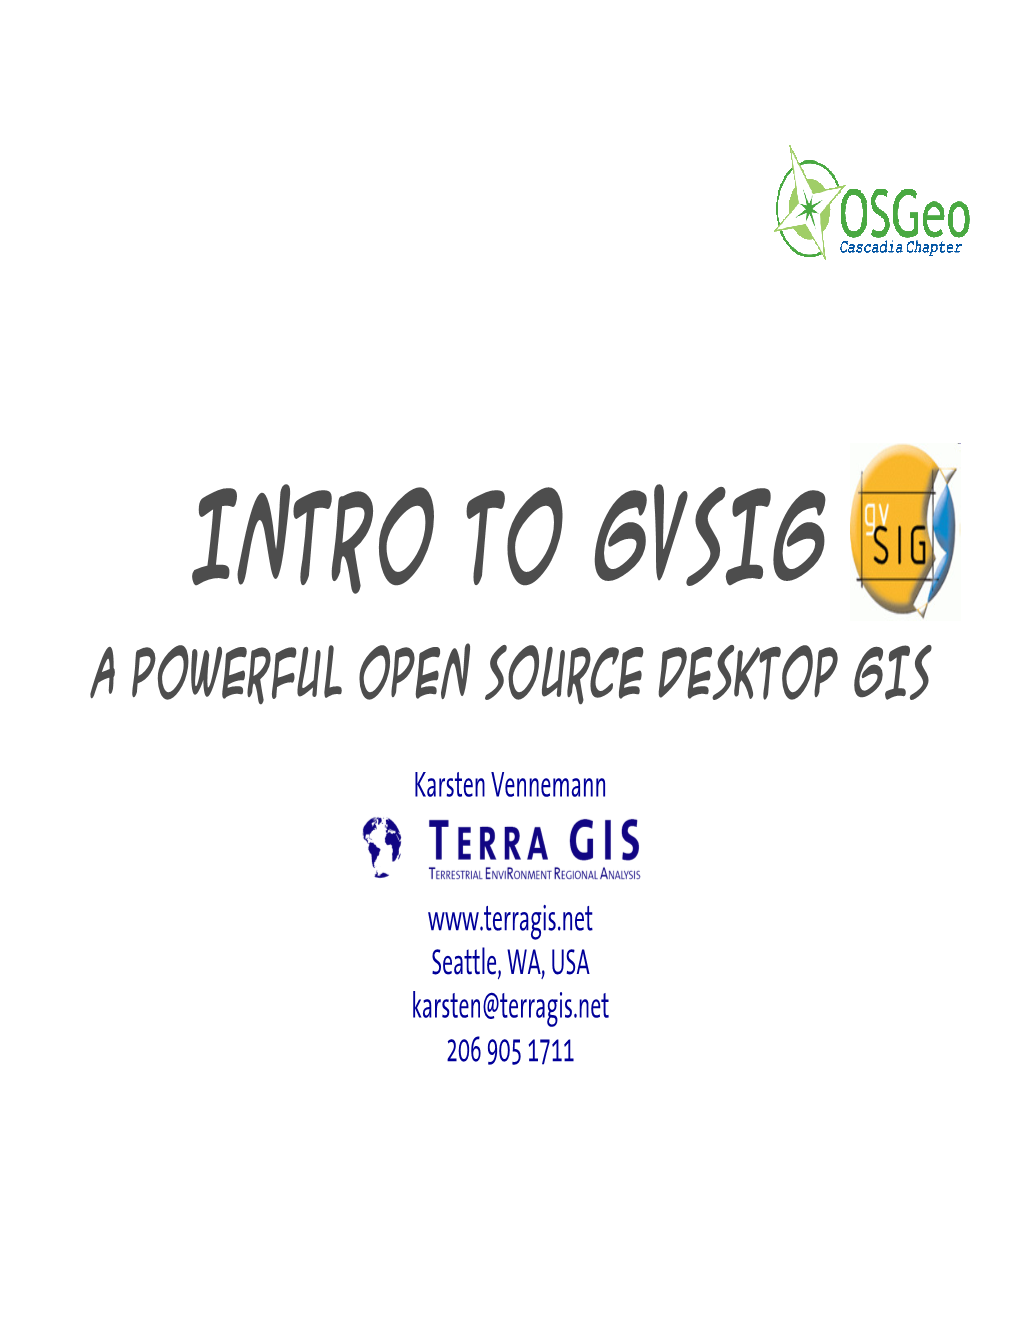 Intro to Gvsig a Powerful Open Source Desktop GIS